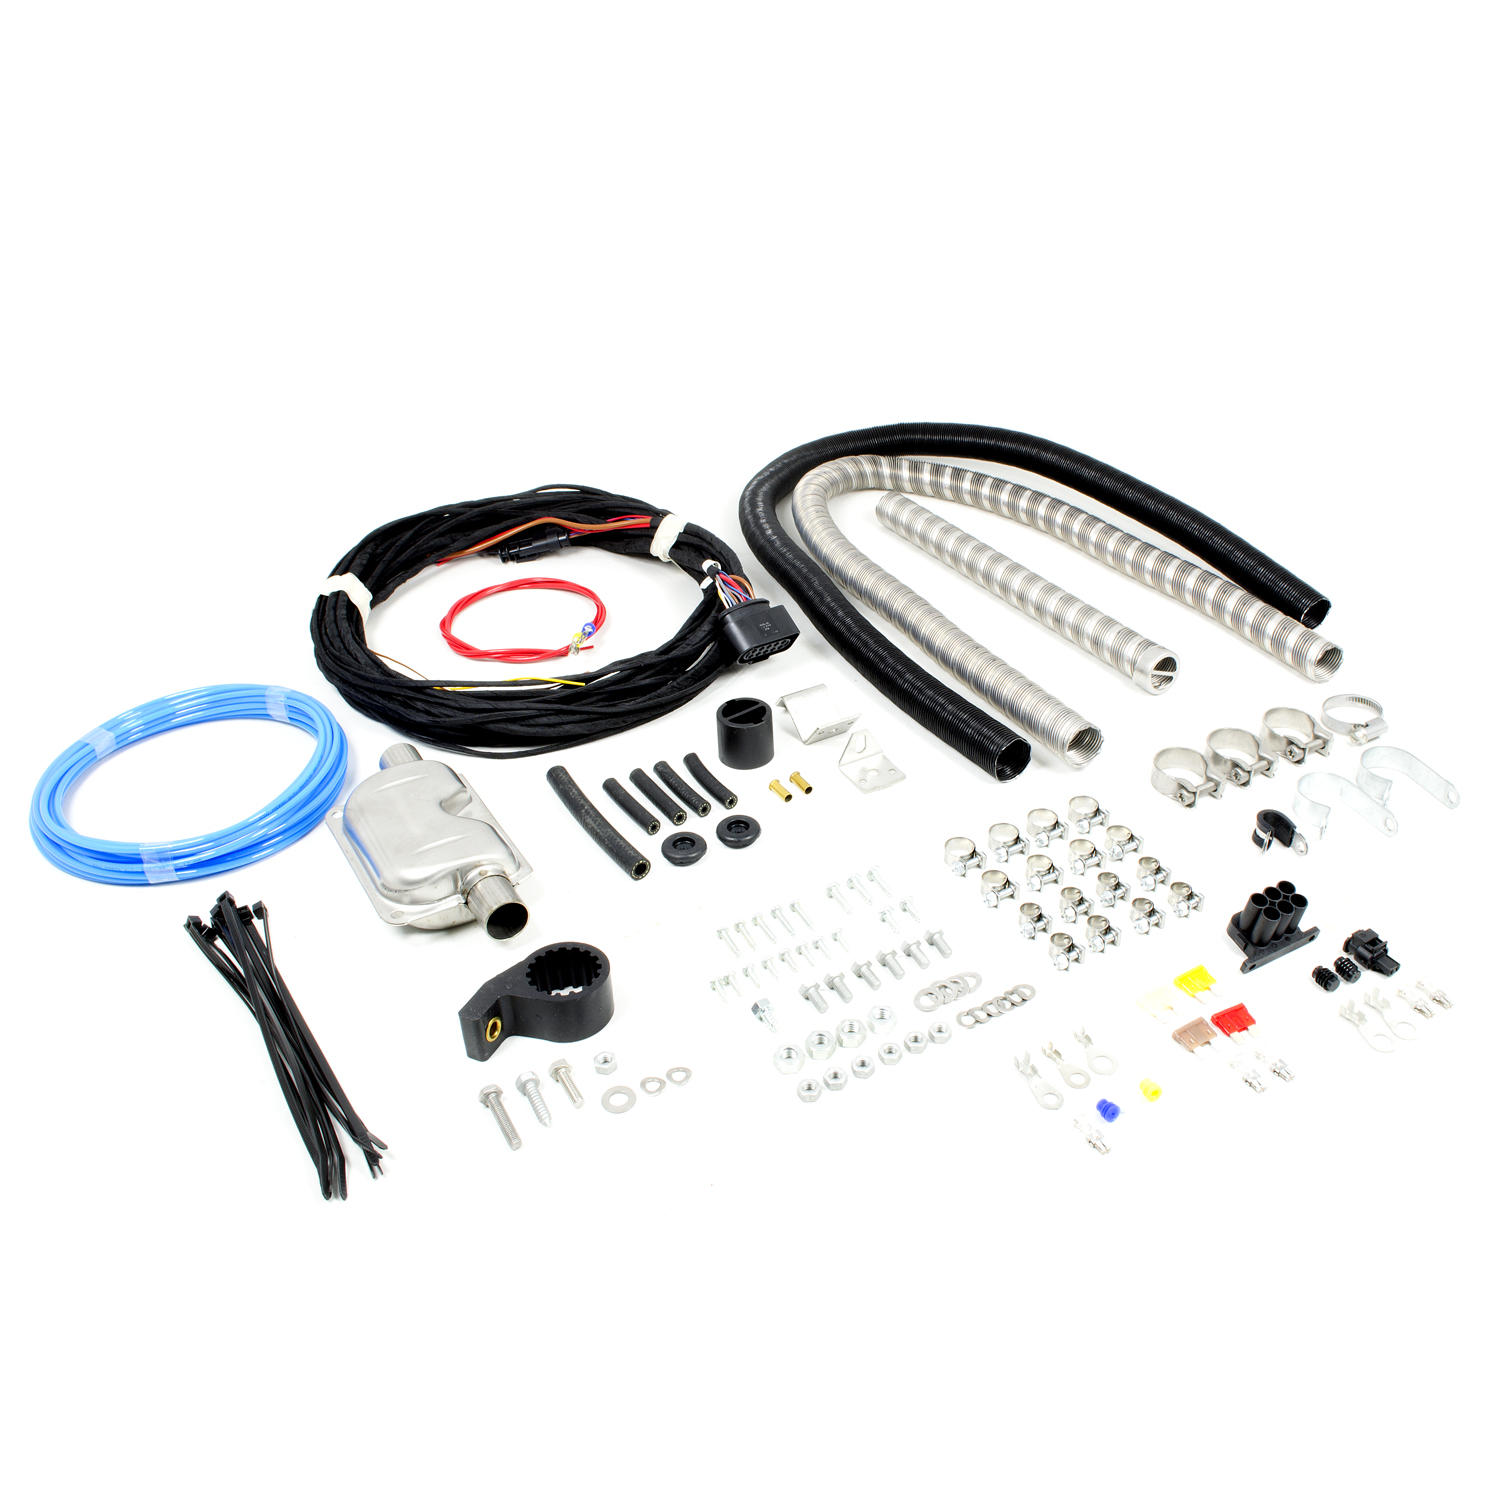 Airtronic D4 mounting kit